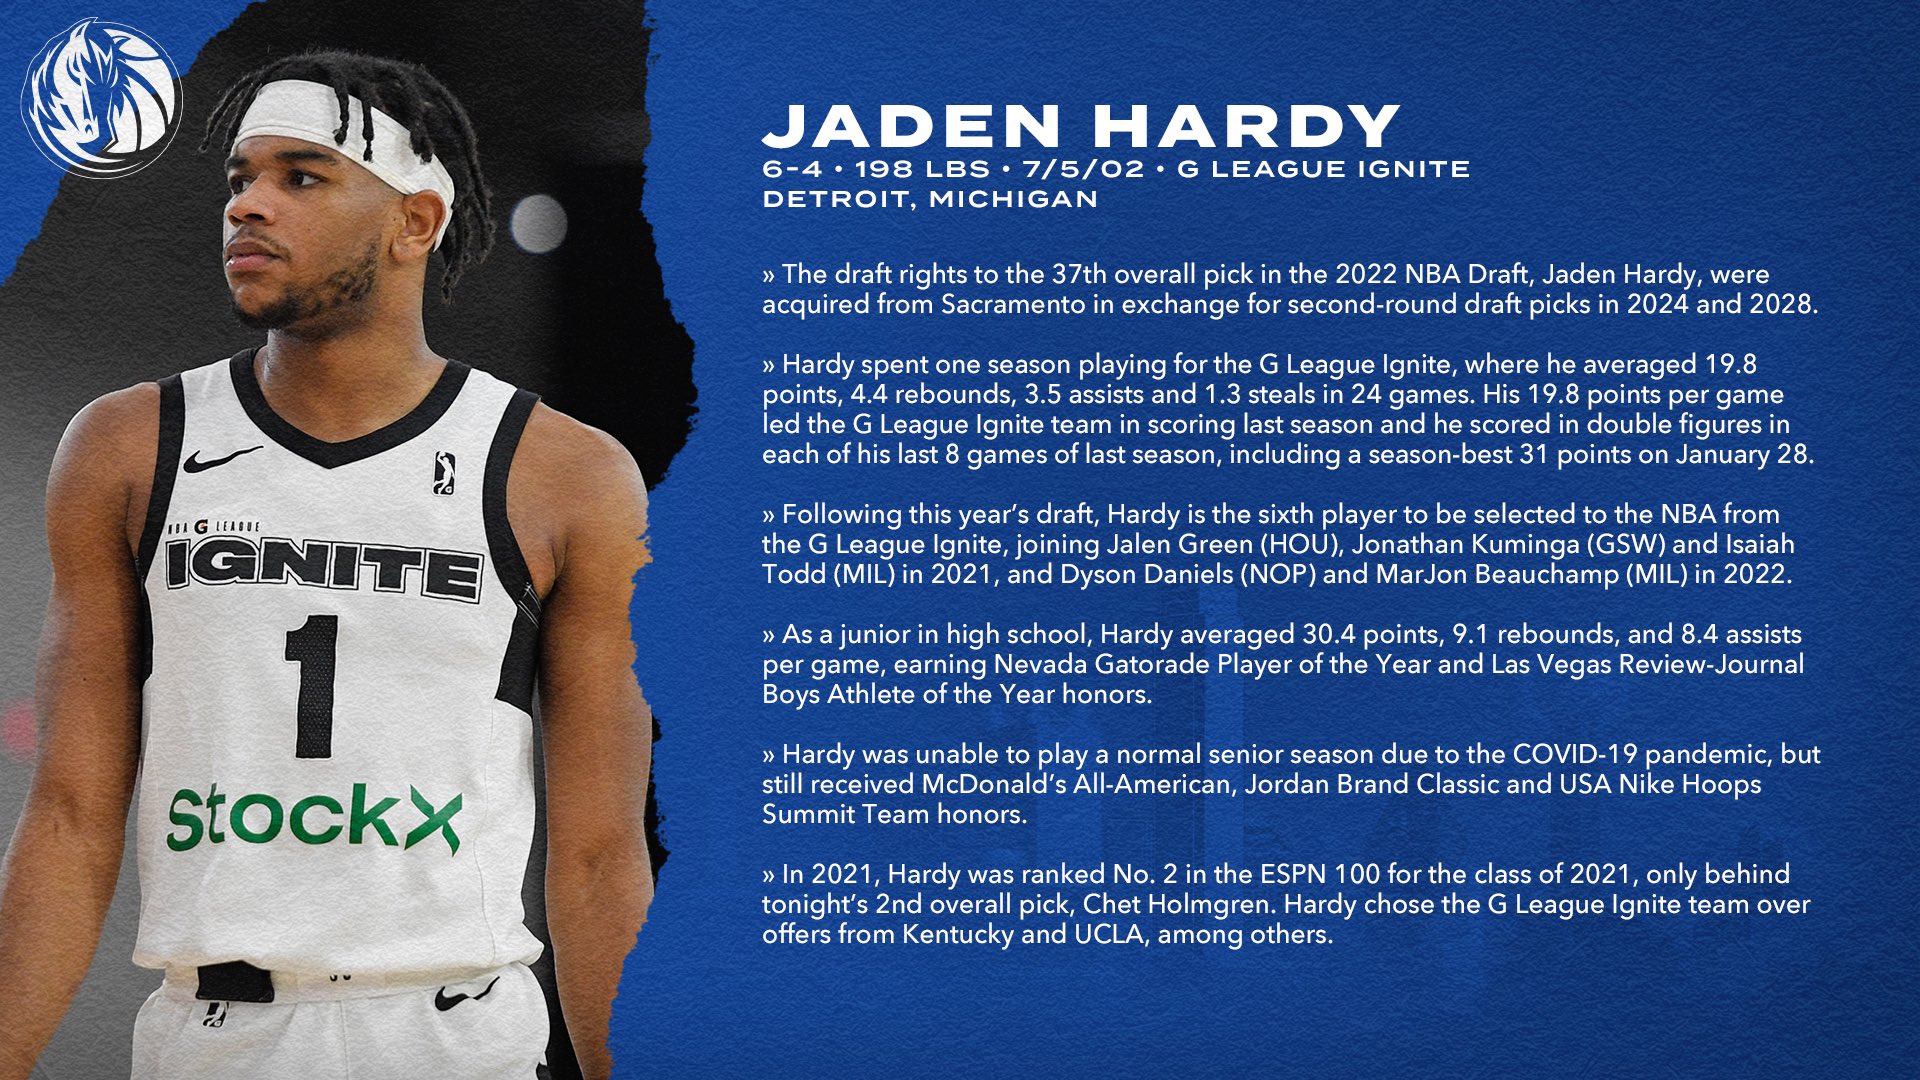 Mavs PR on X: Jaden Hardy spent one season playing for the G